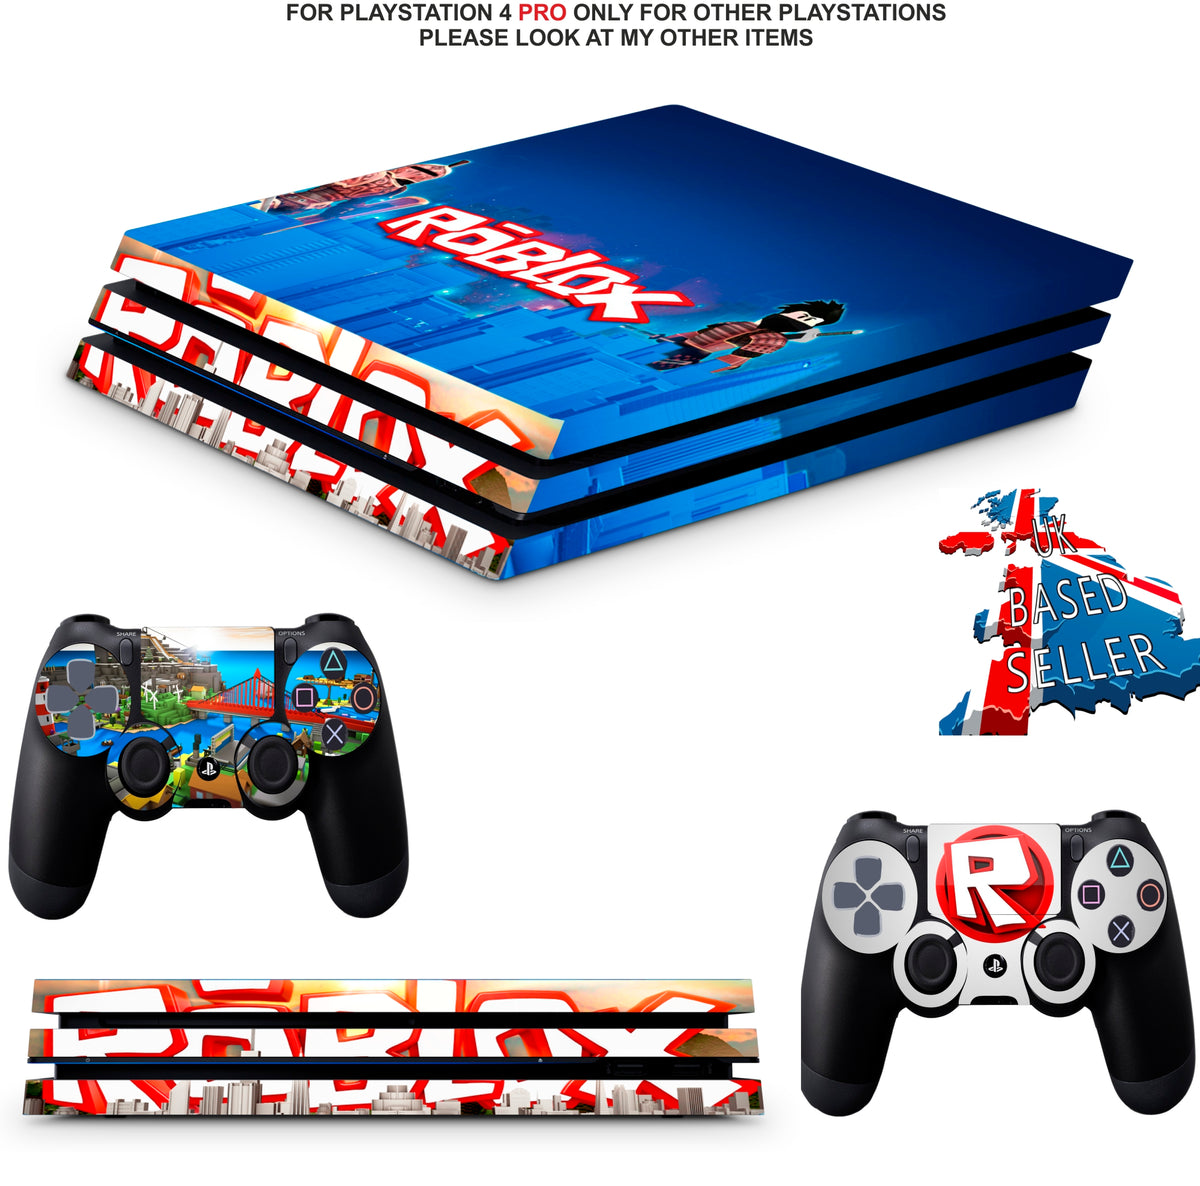 ROBLOX PS4 PRO SKINS DECALS (PS4 PRO VERSION